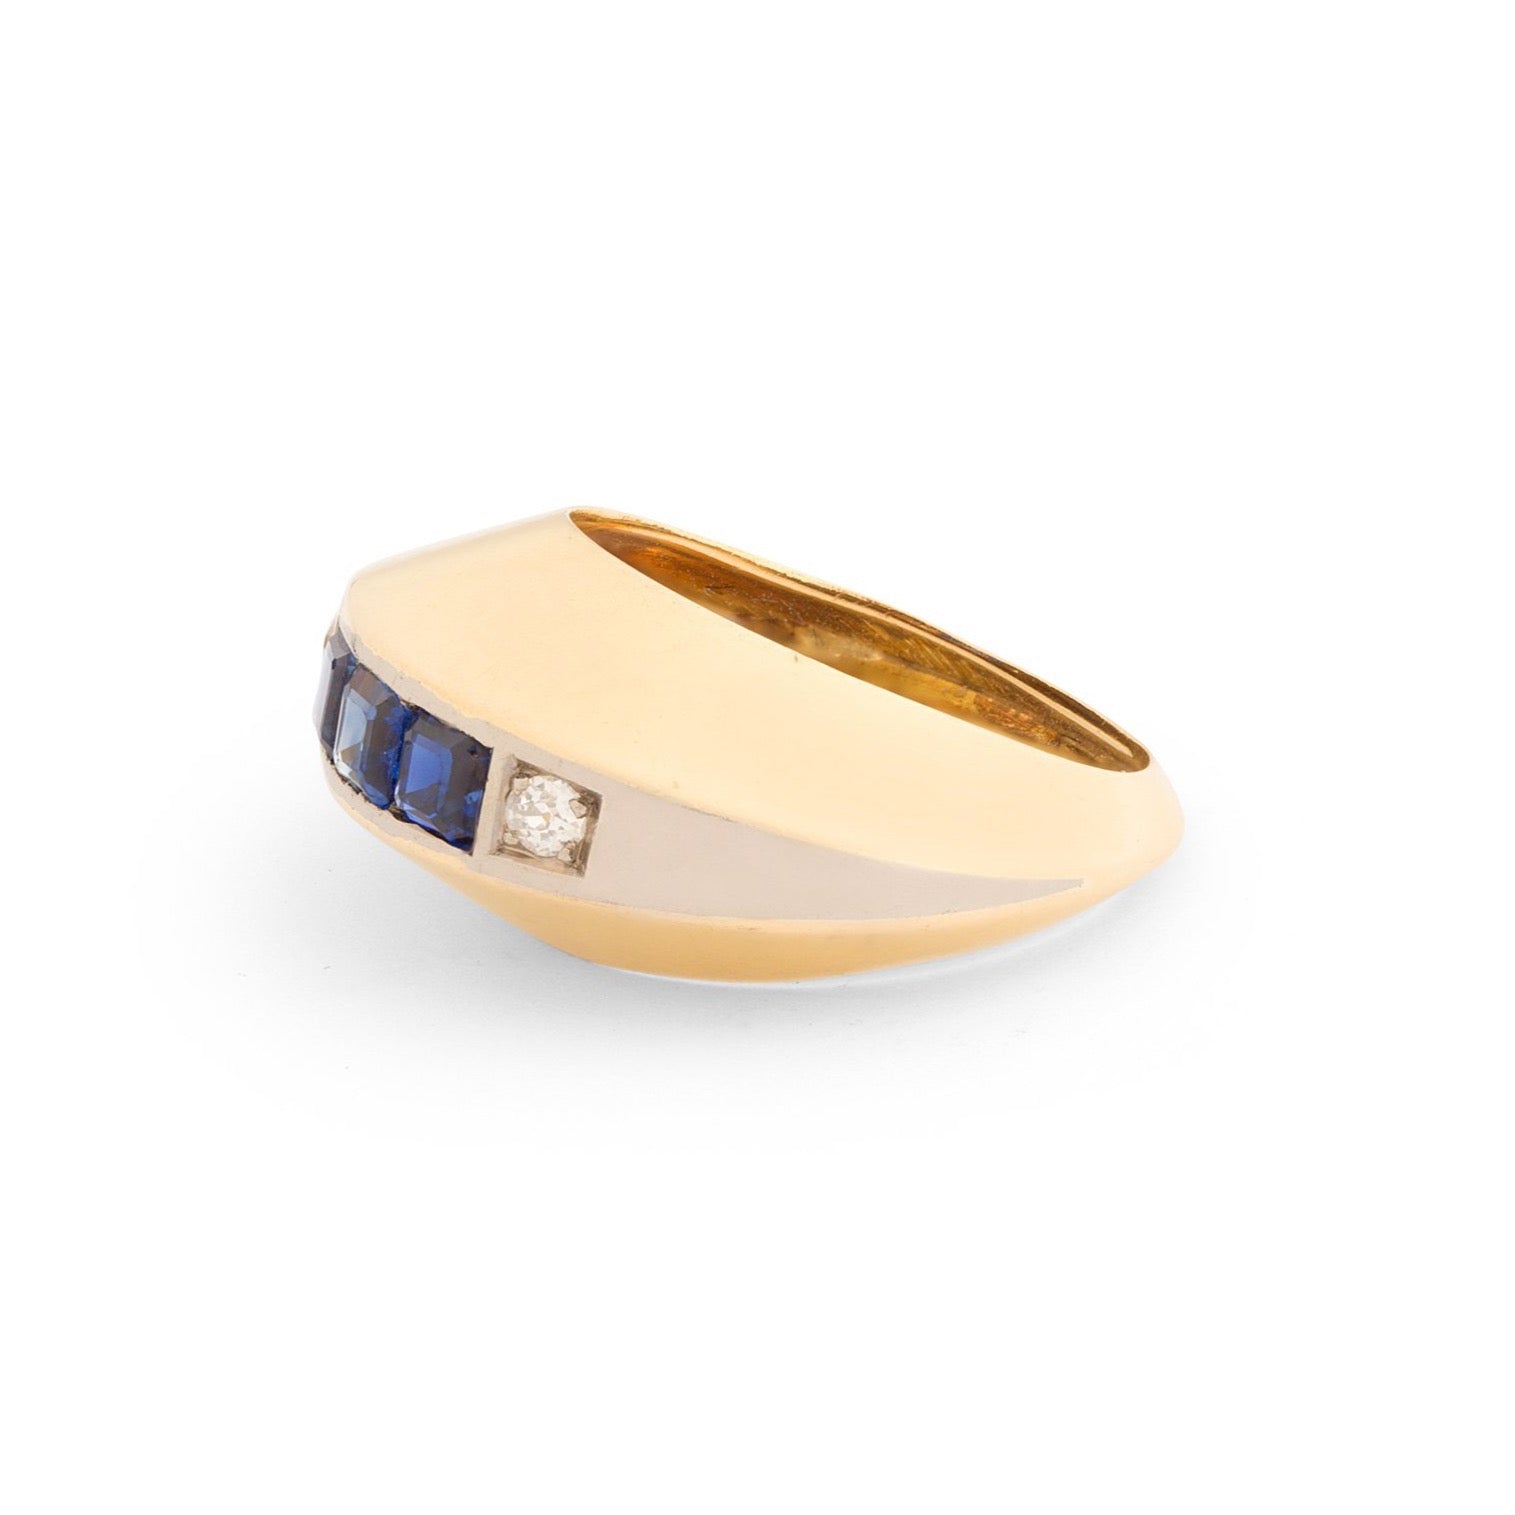 Diamond, Synthetic Sapphire, and 18K Gold Dome Fan Ring